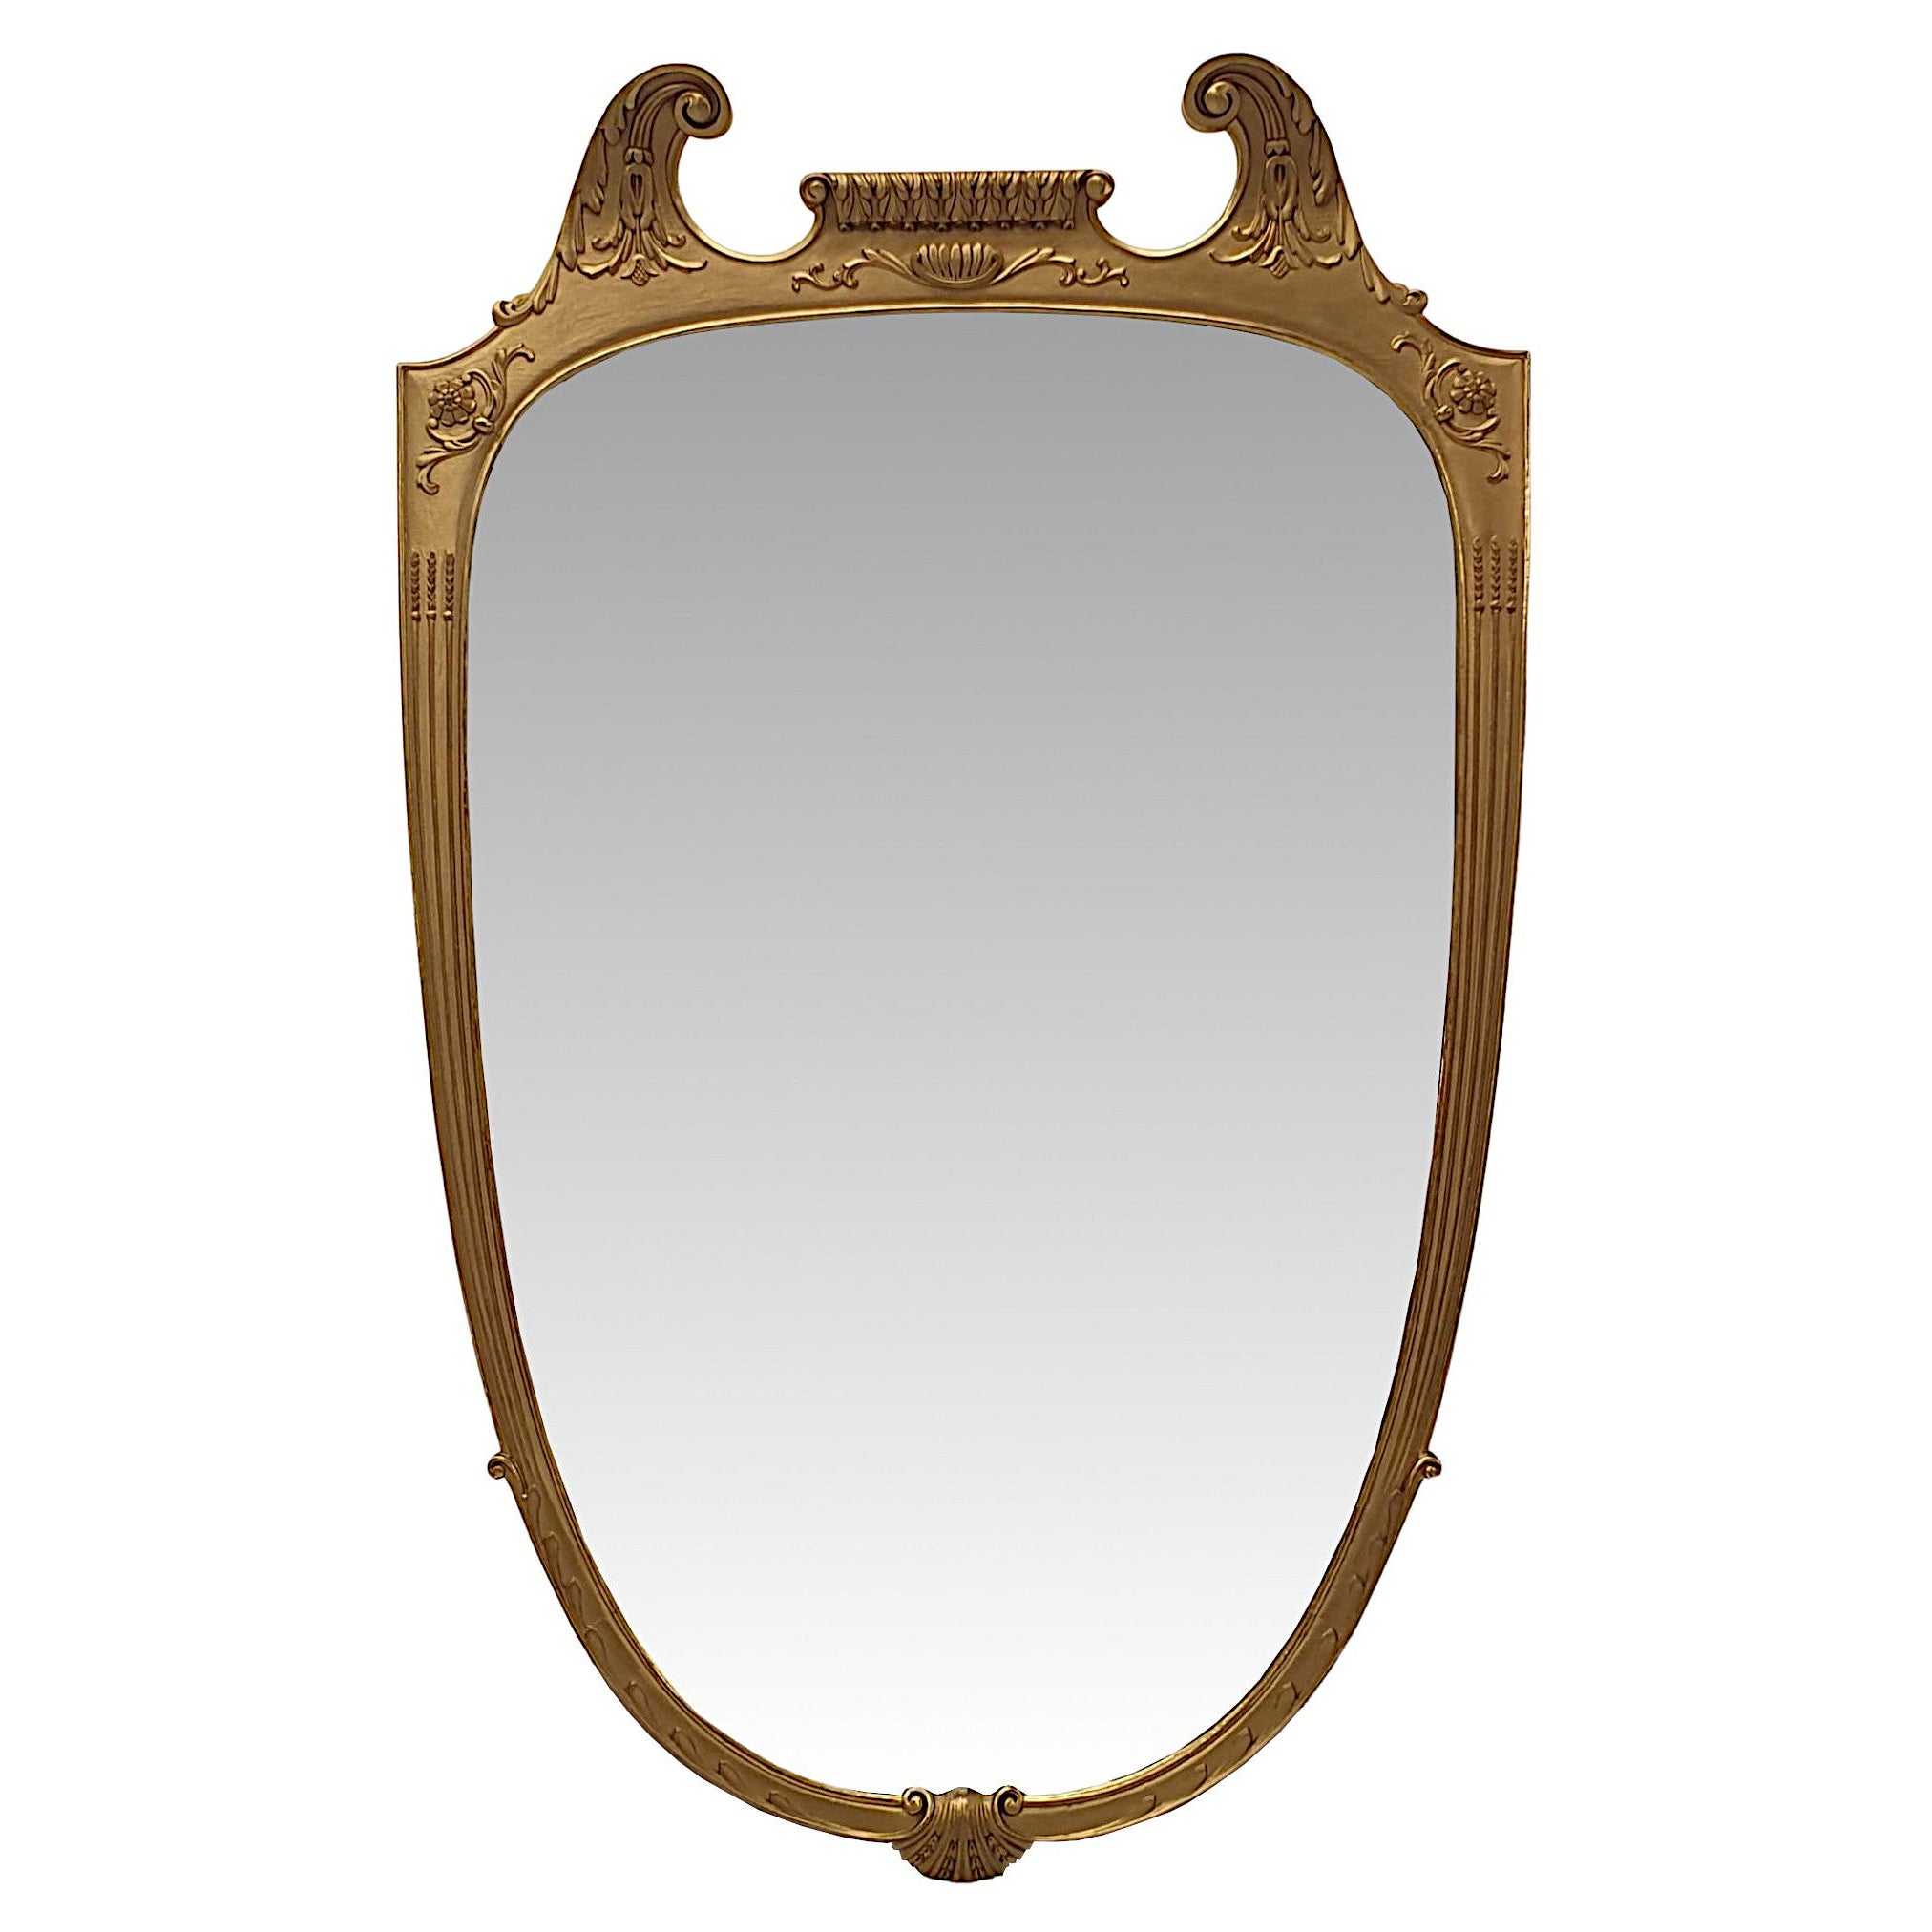 Very Fine Late 19th Century Giltwood Overmantle or Hall Mirror For Sale